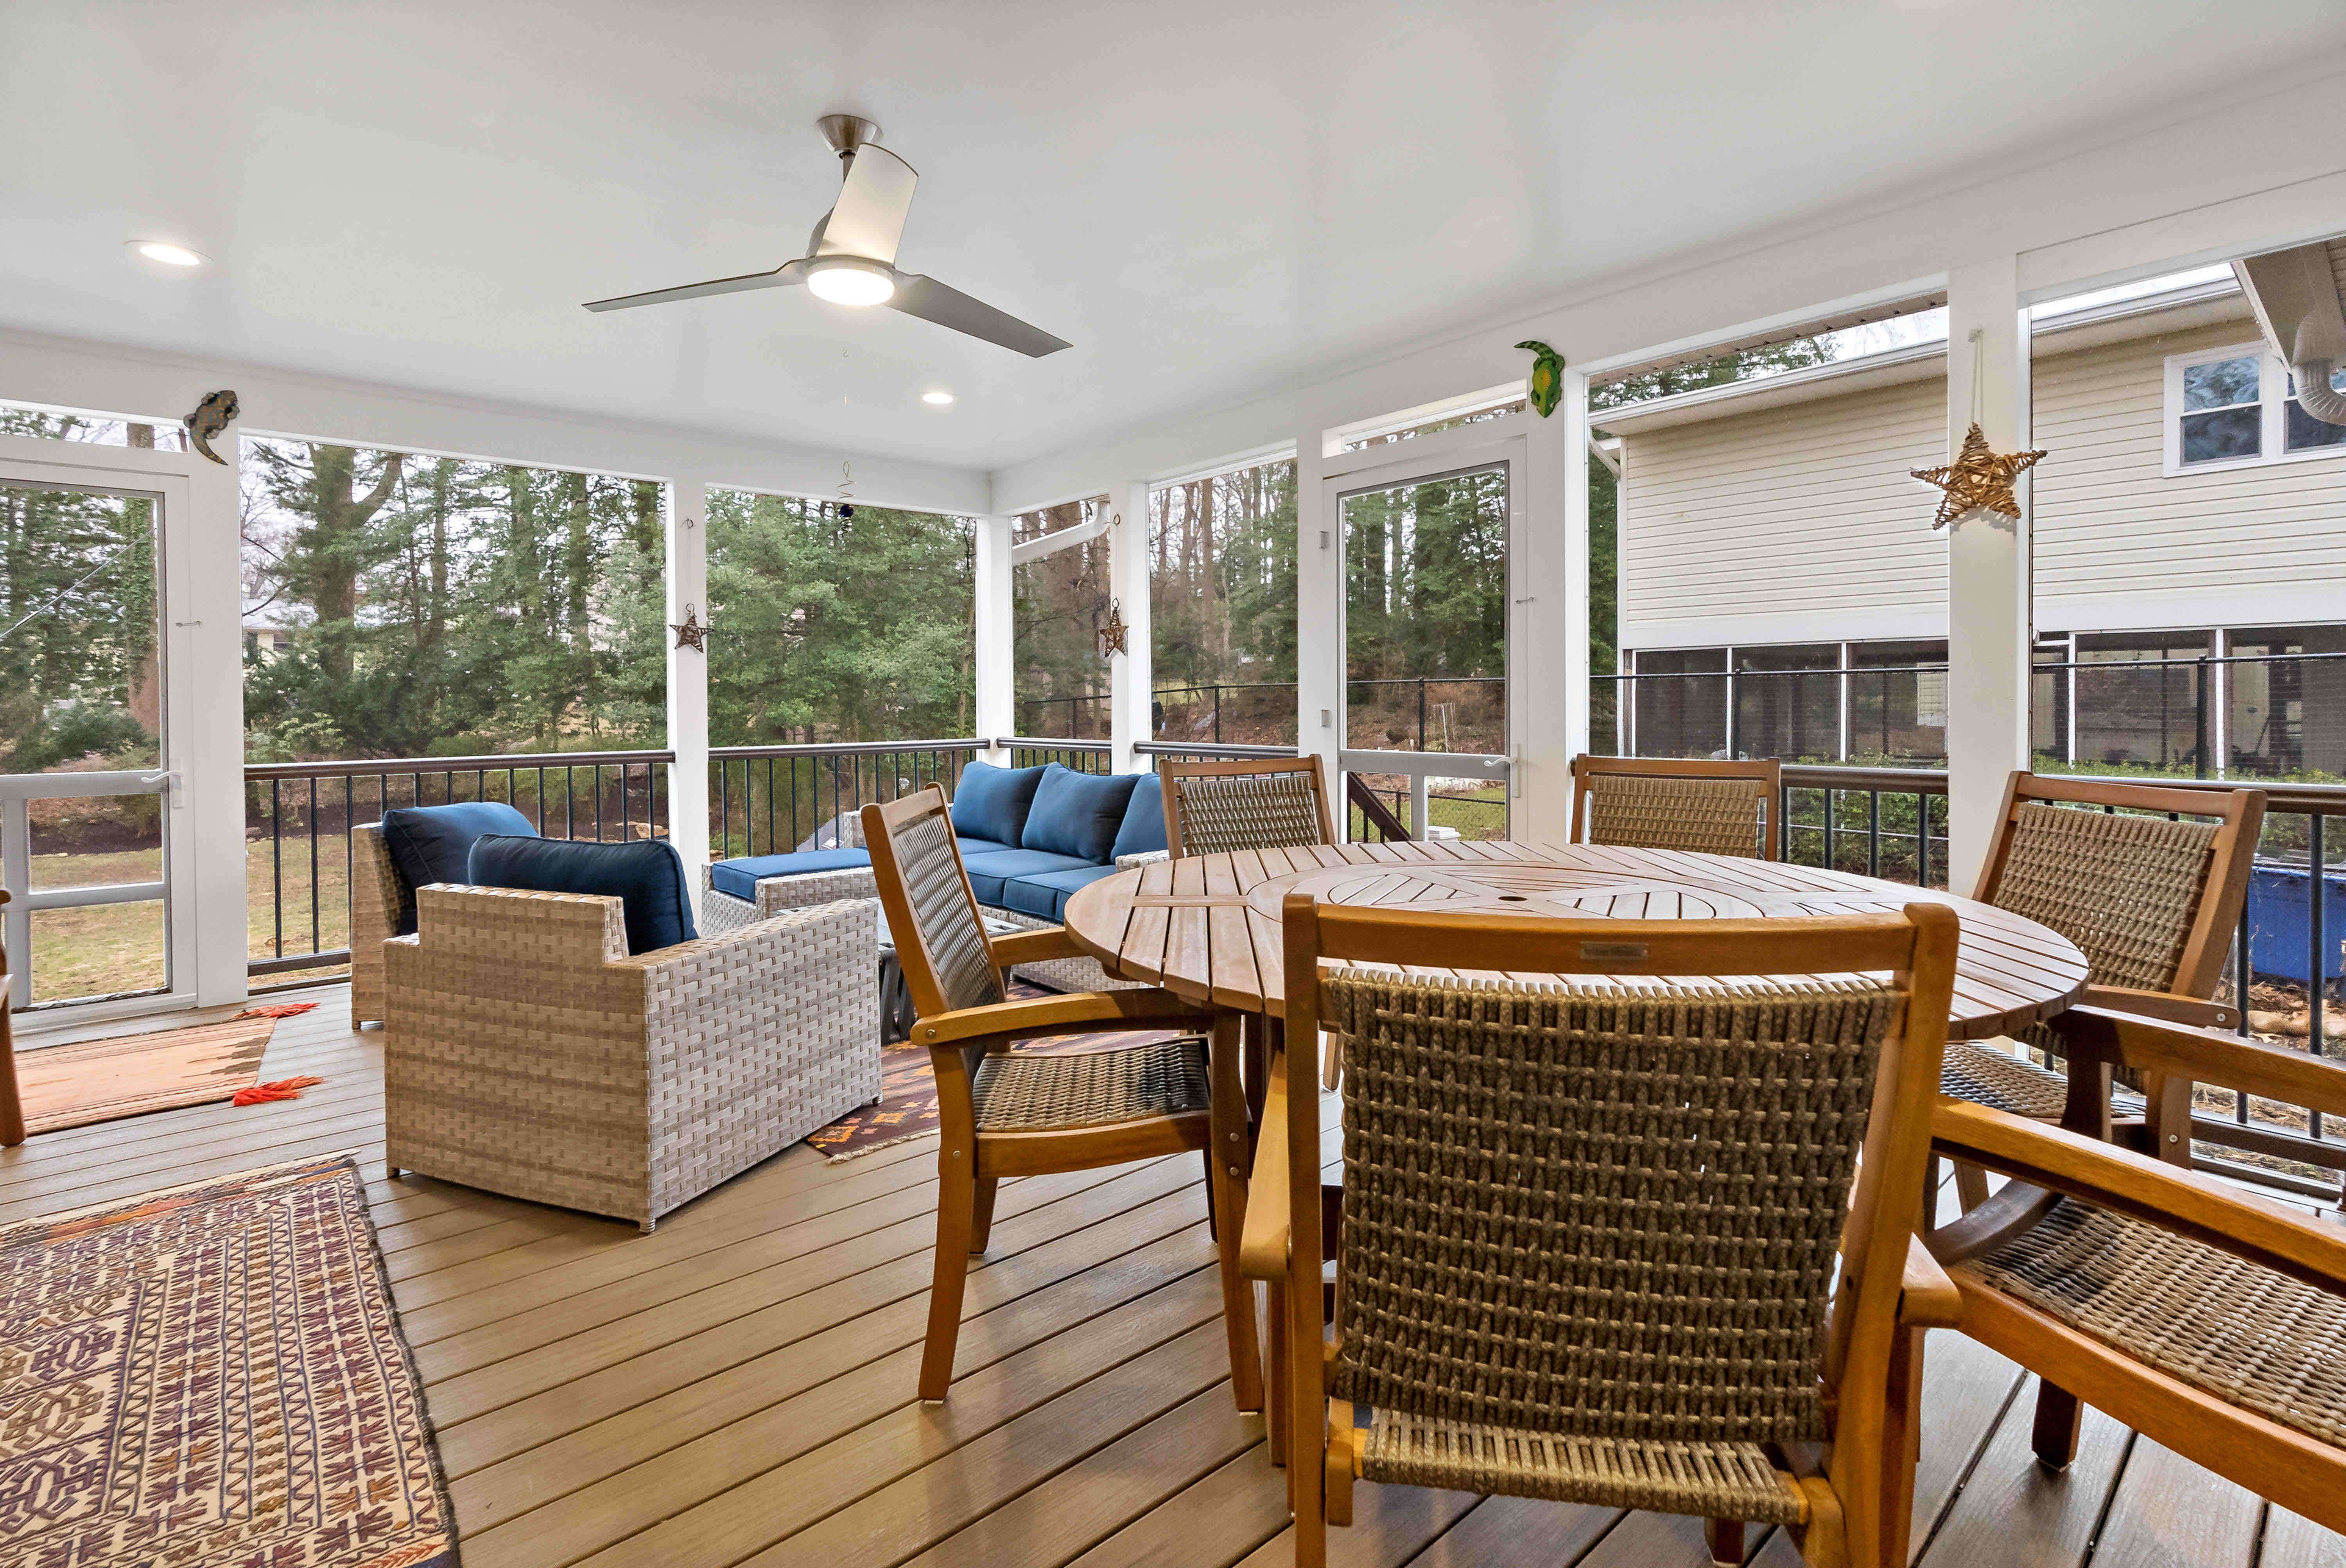 Screened porch with ceiling fan and wood flooring